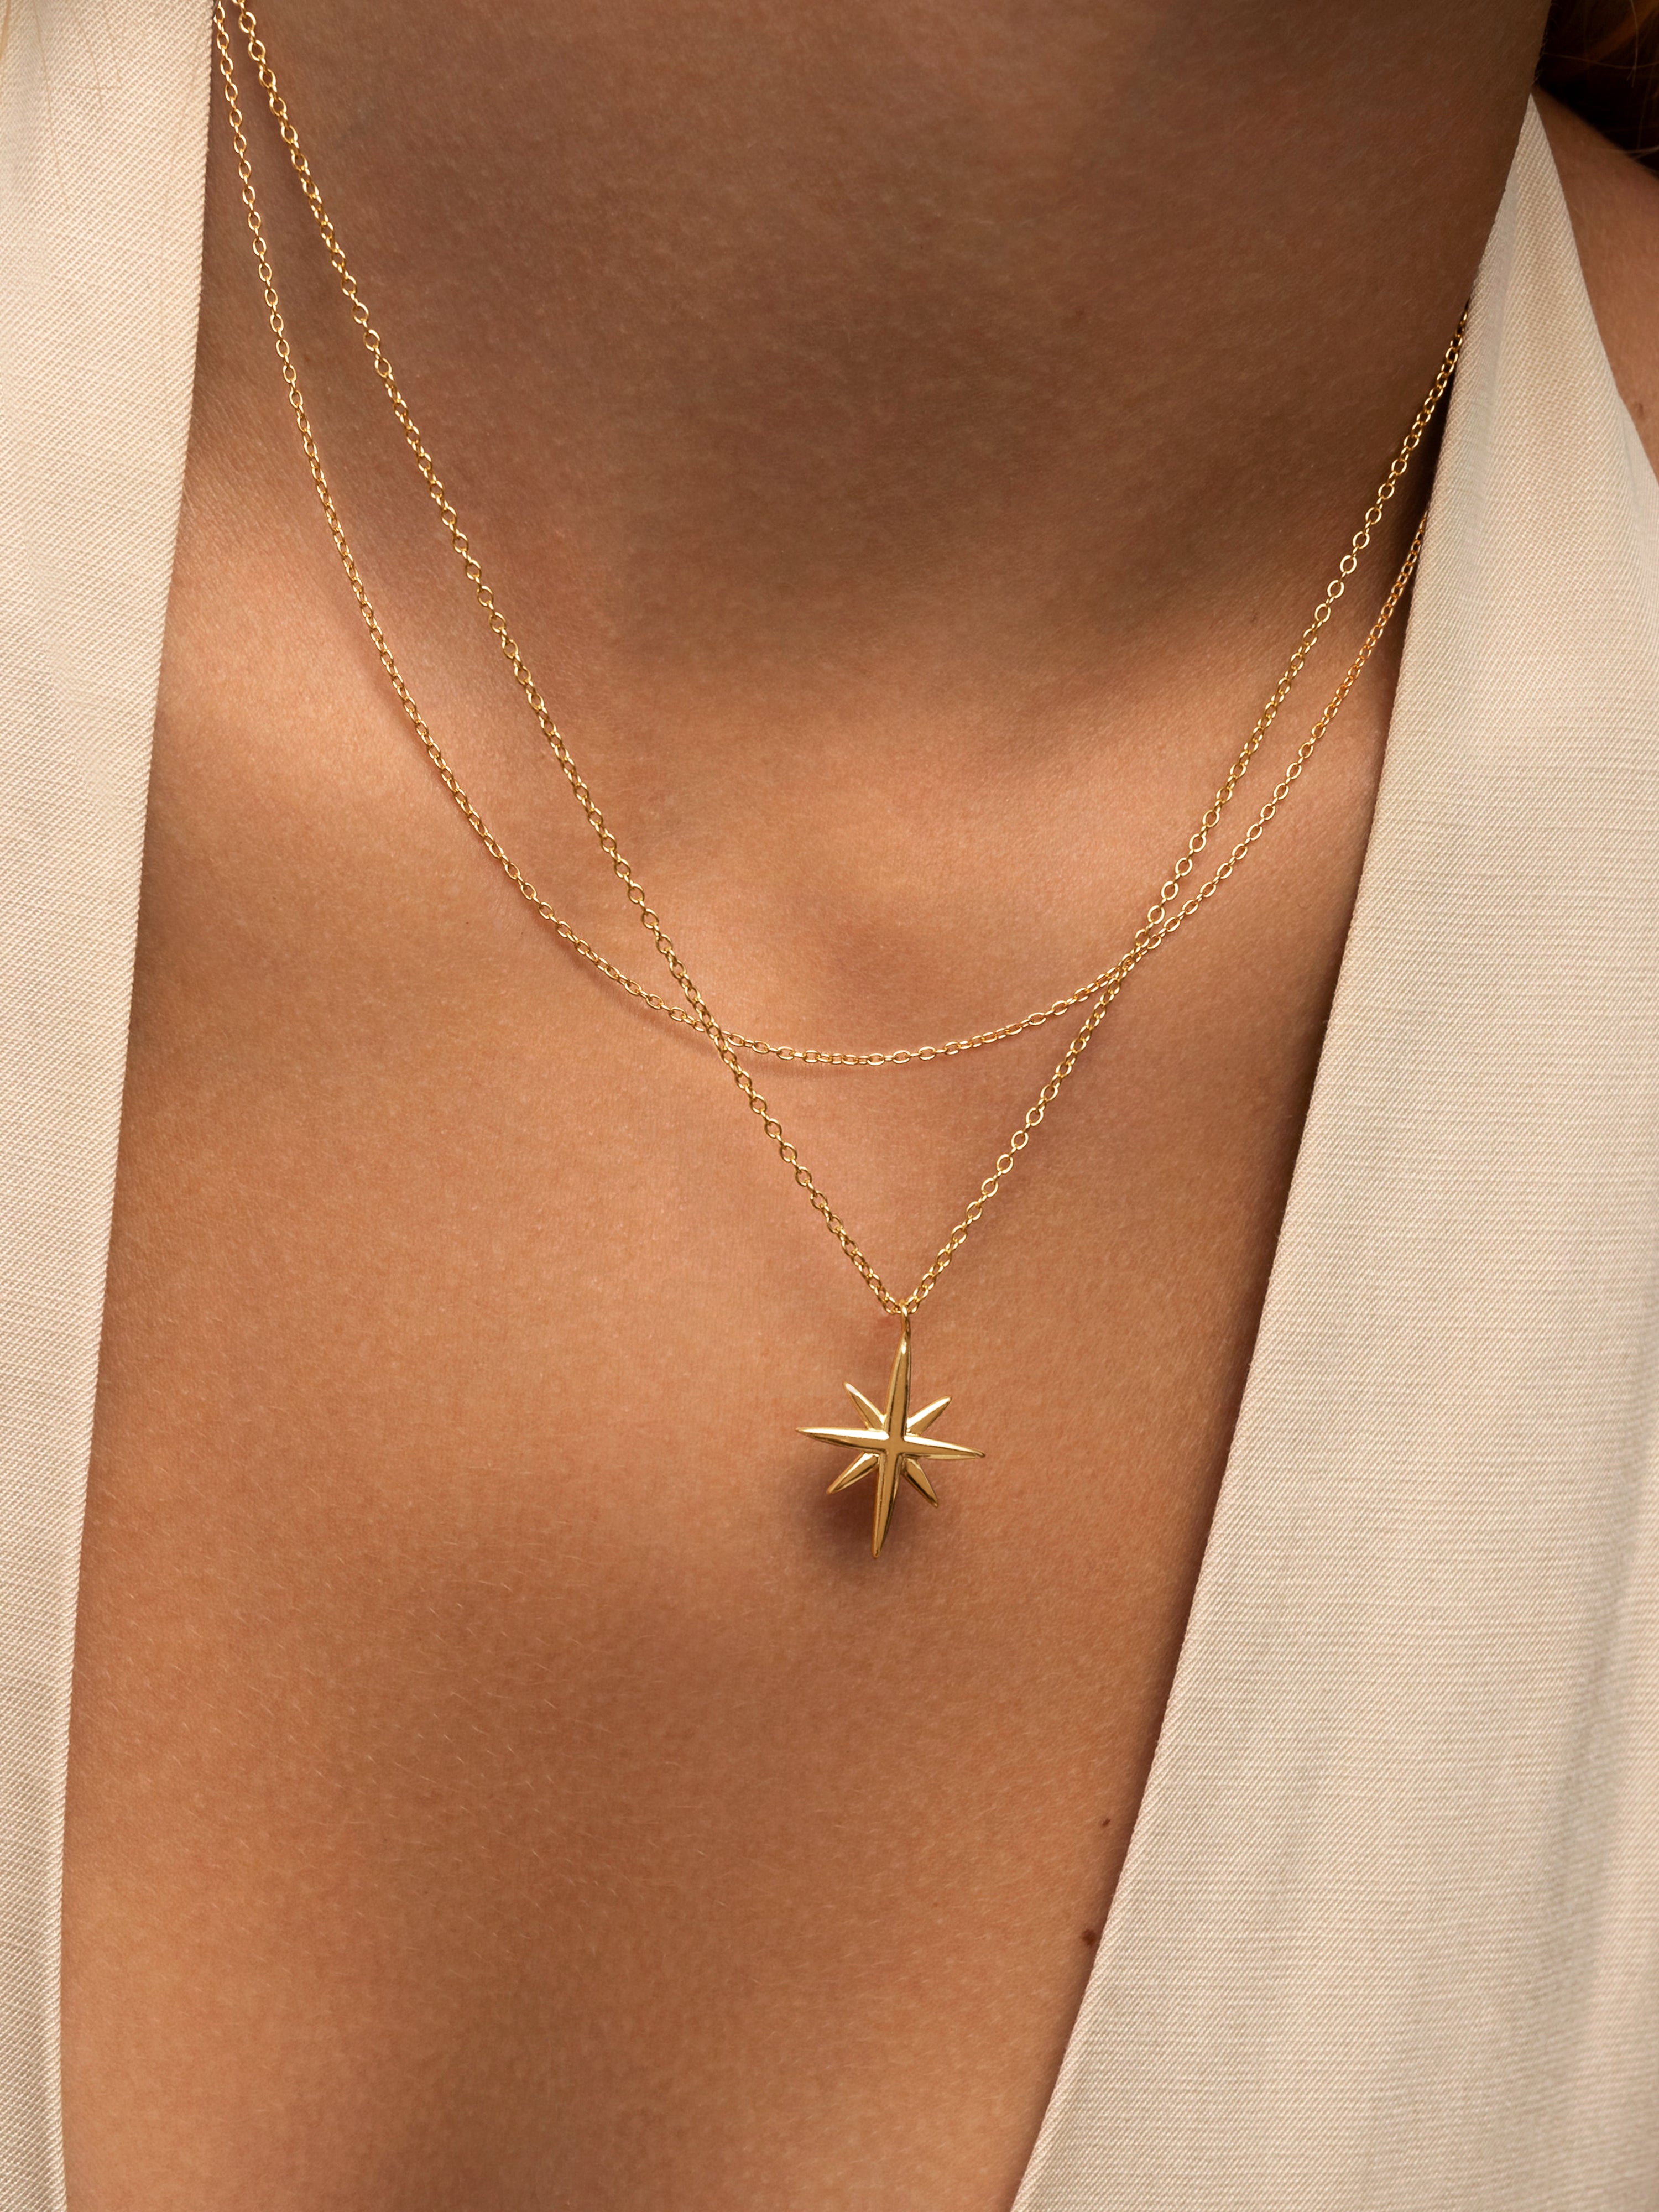 Guidance Gold Necklace